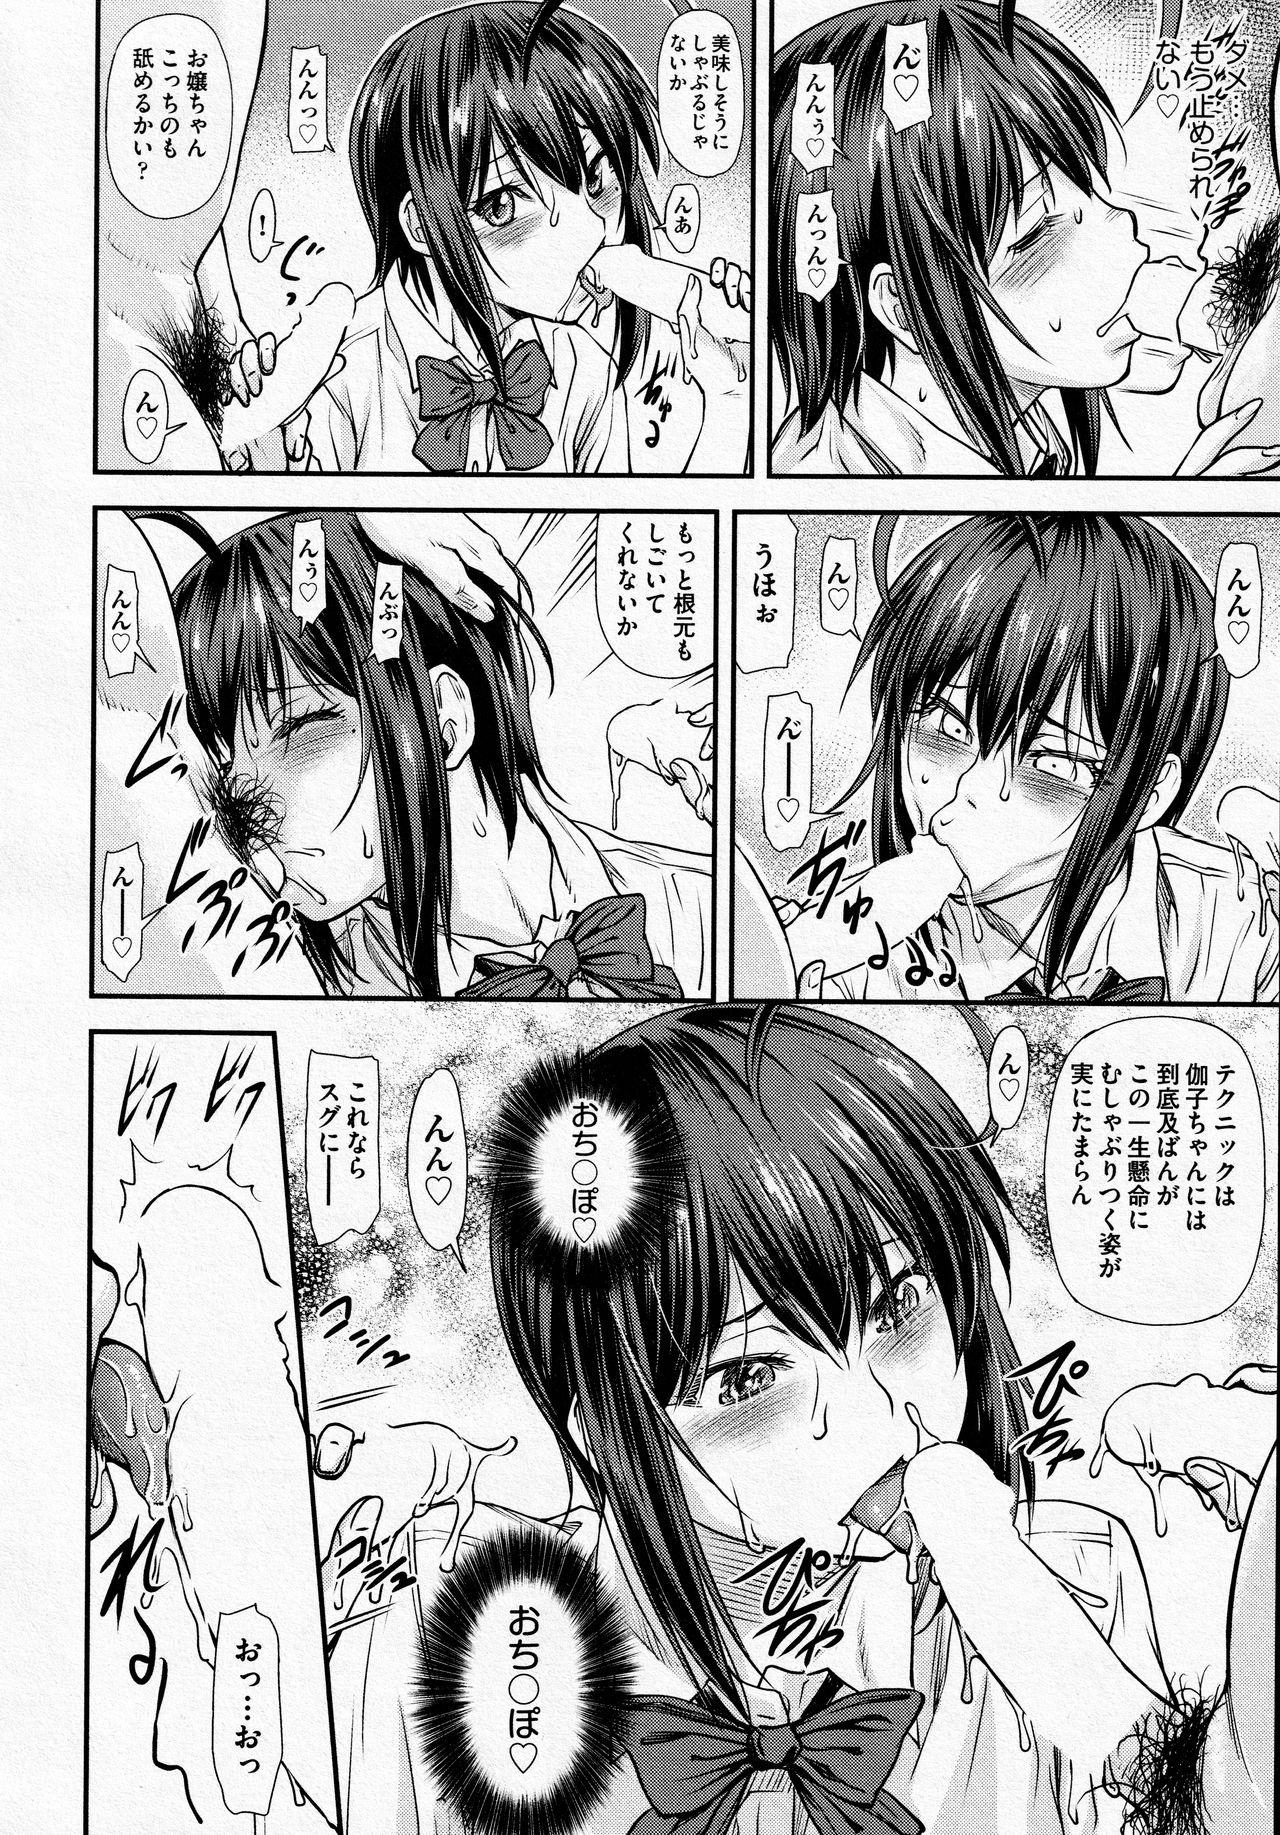 Coed Kaname Date #14 Free Rough Sex Porn - Page 10